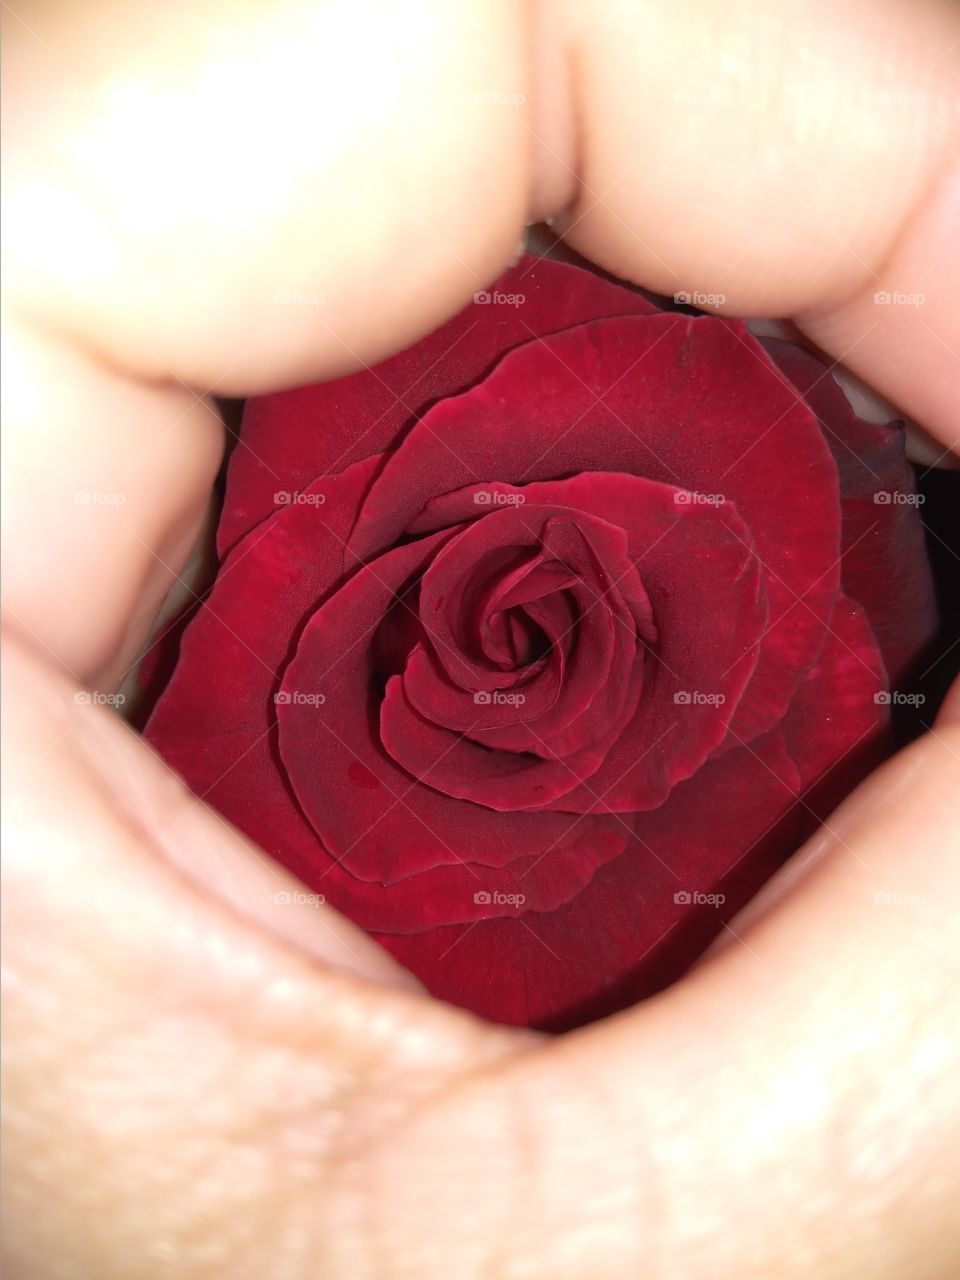 rose in my hand